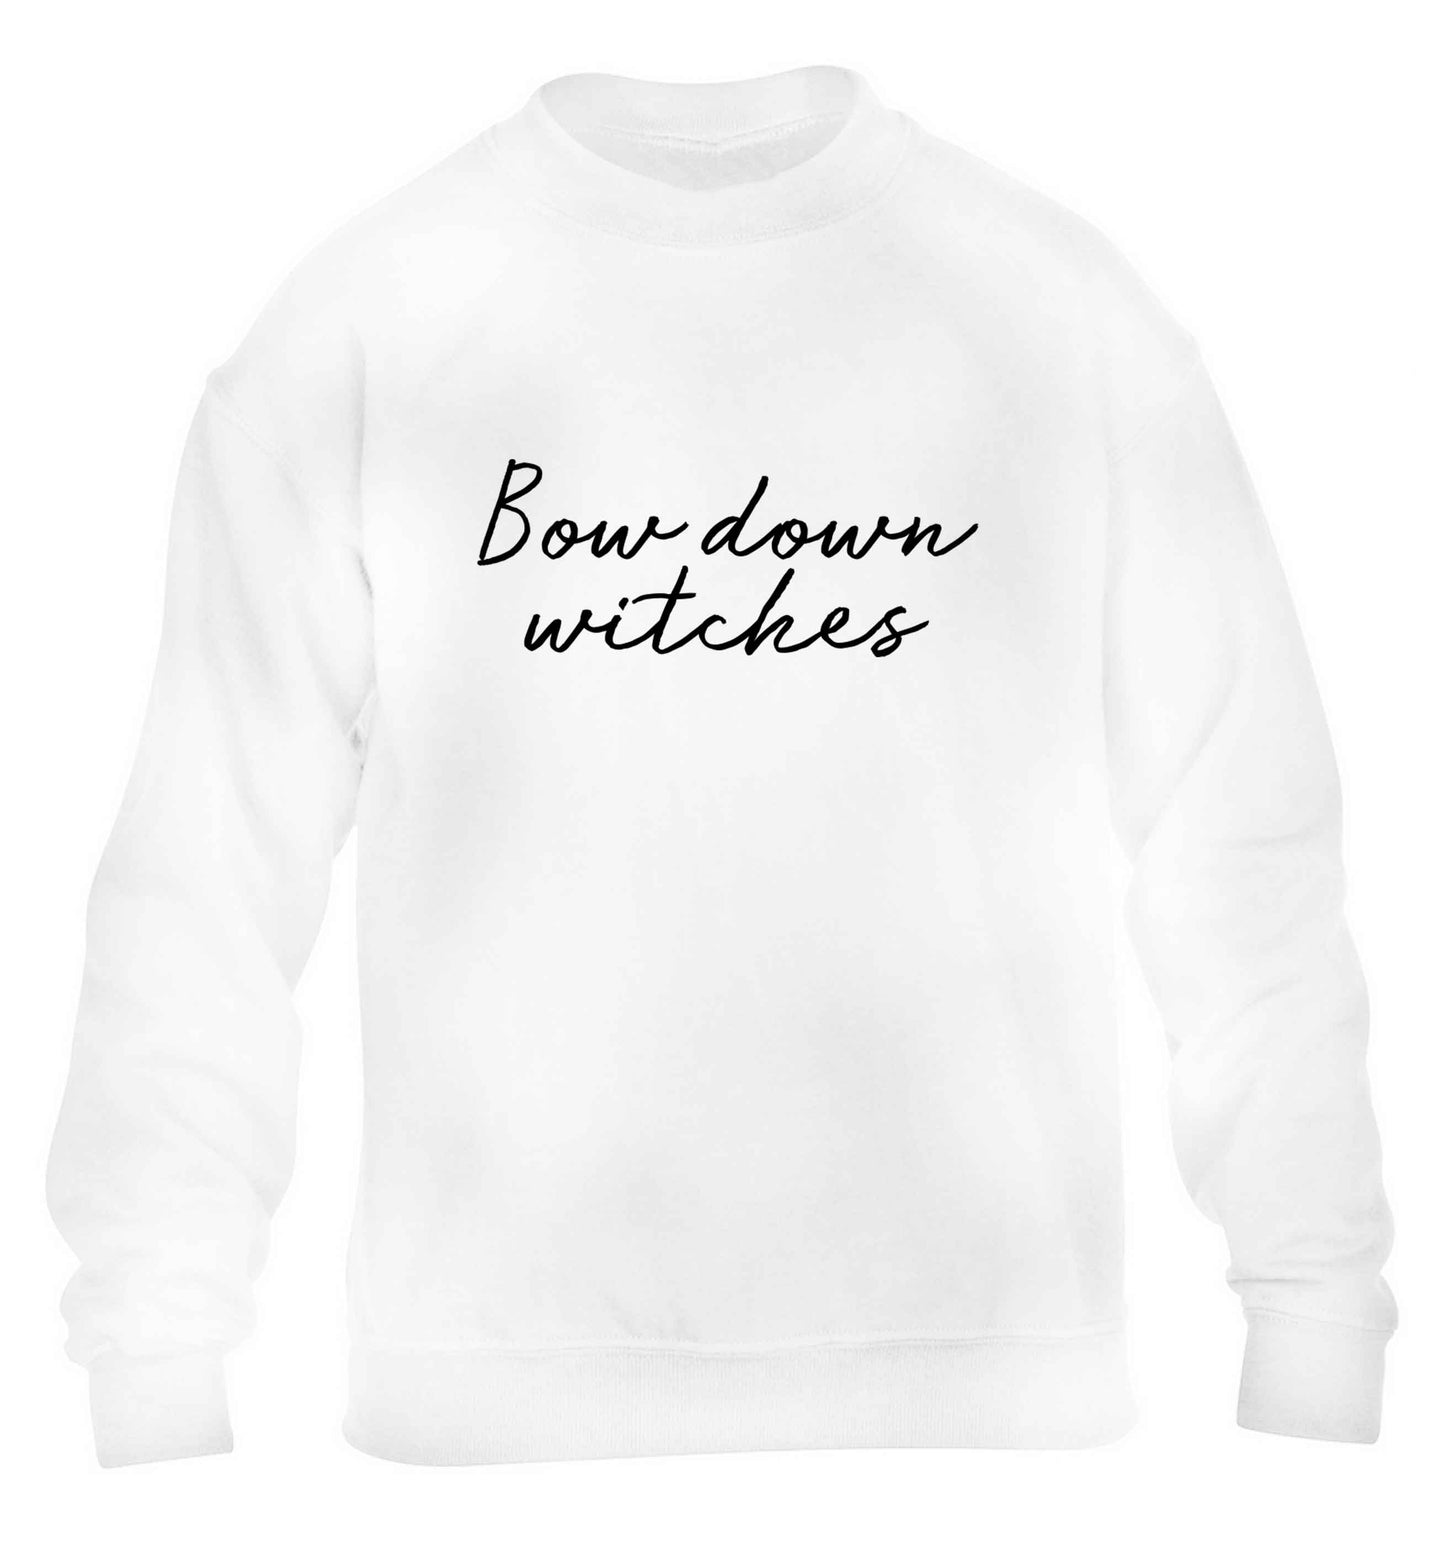 Bow down witches children's white sweater 12-13 Years